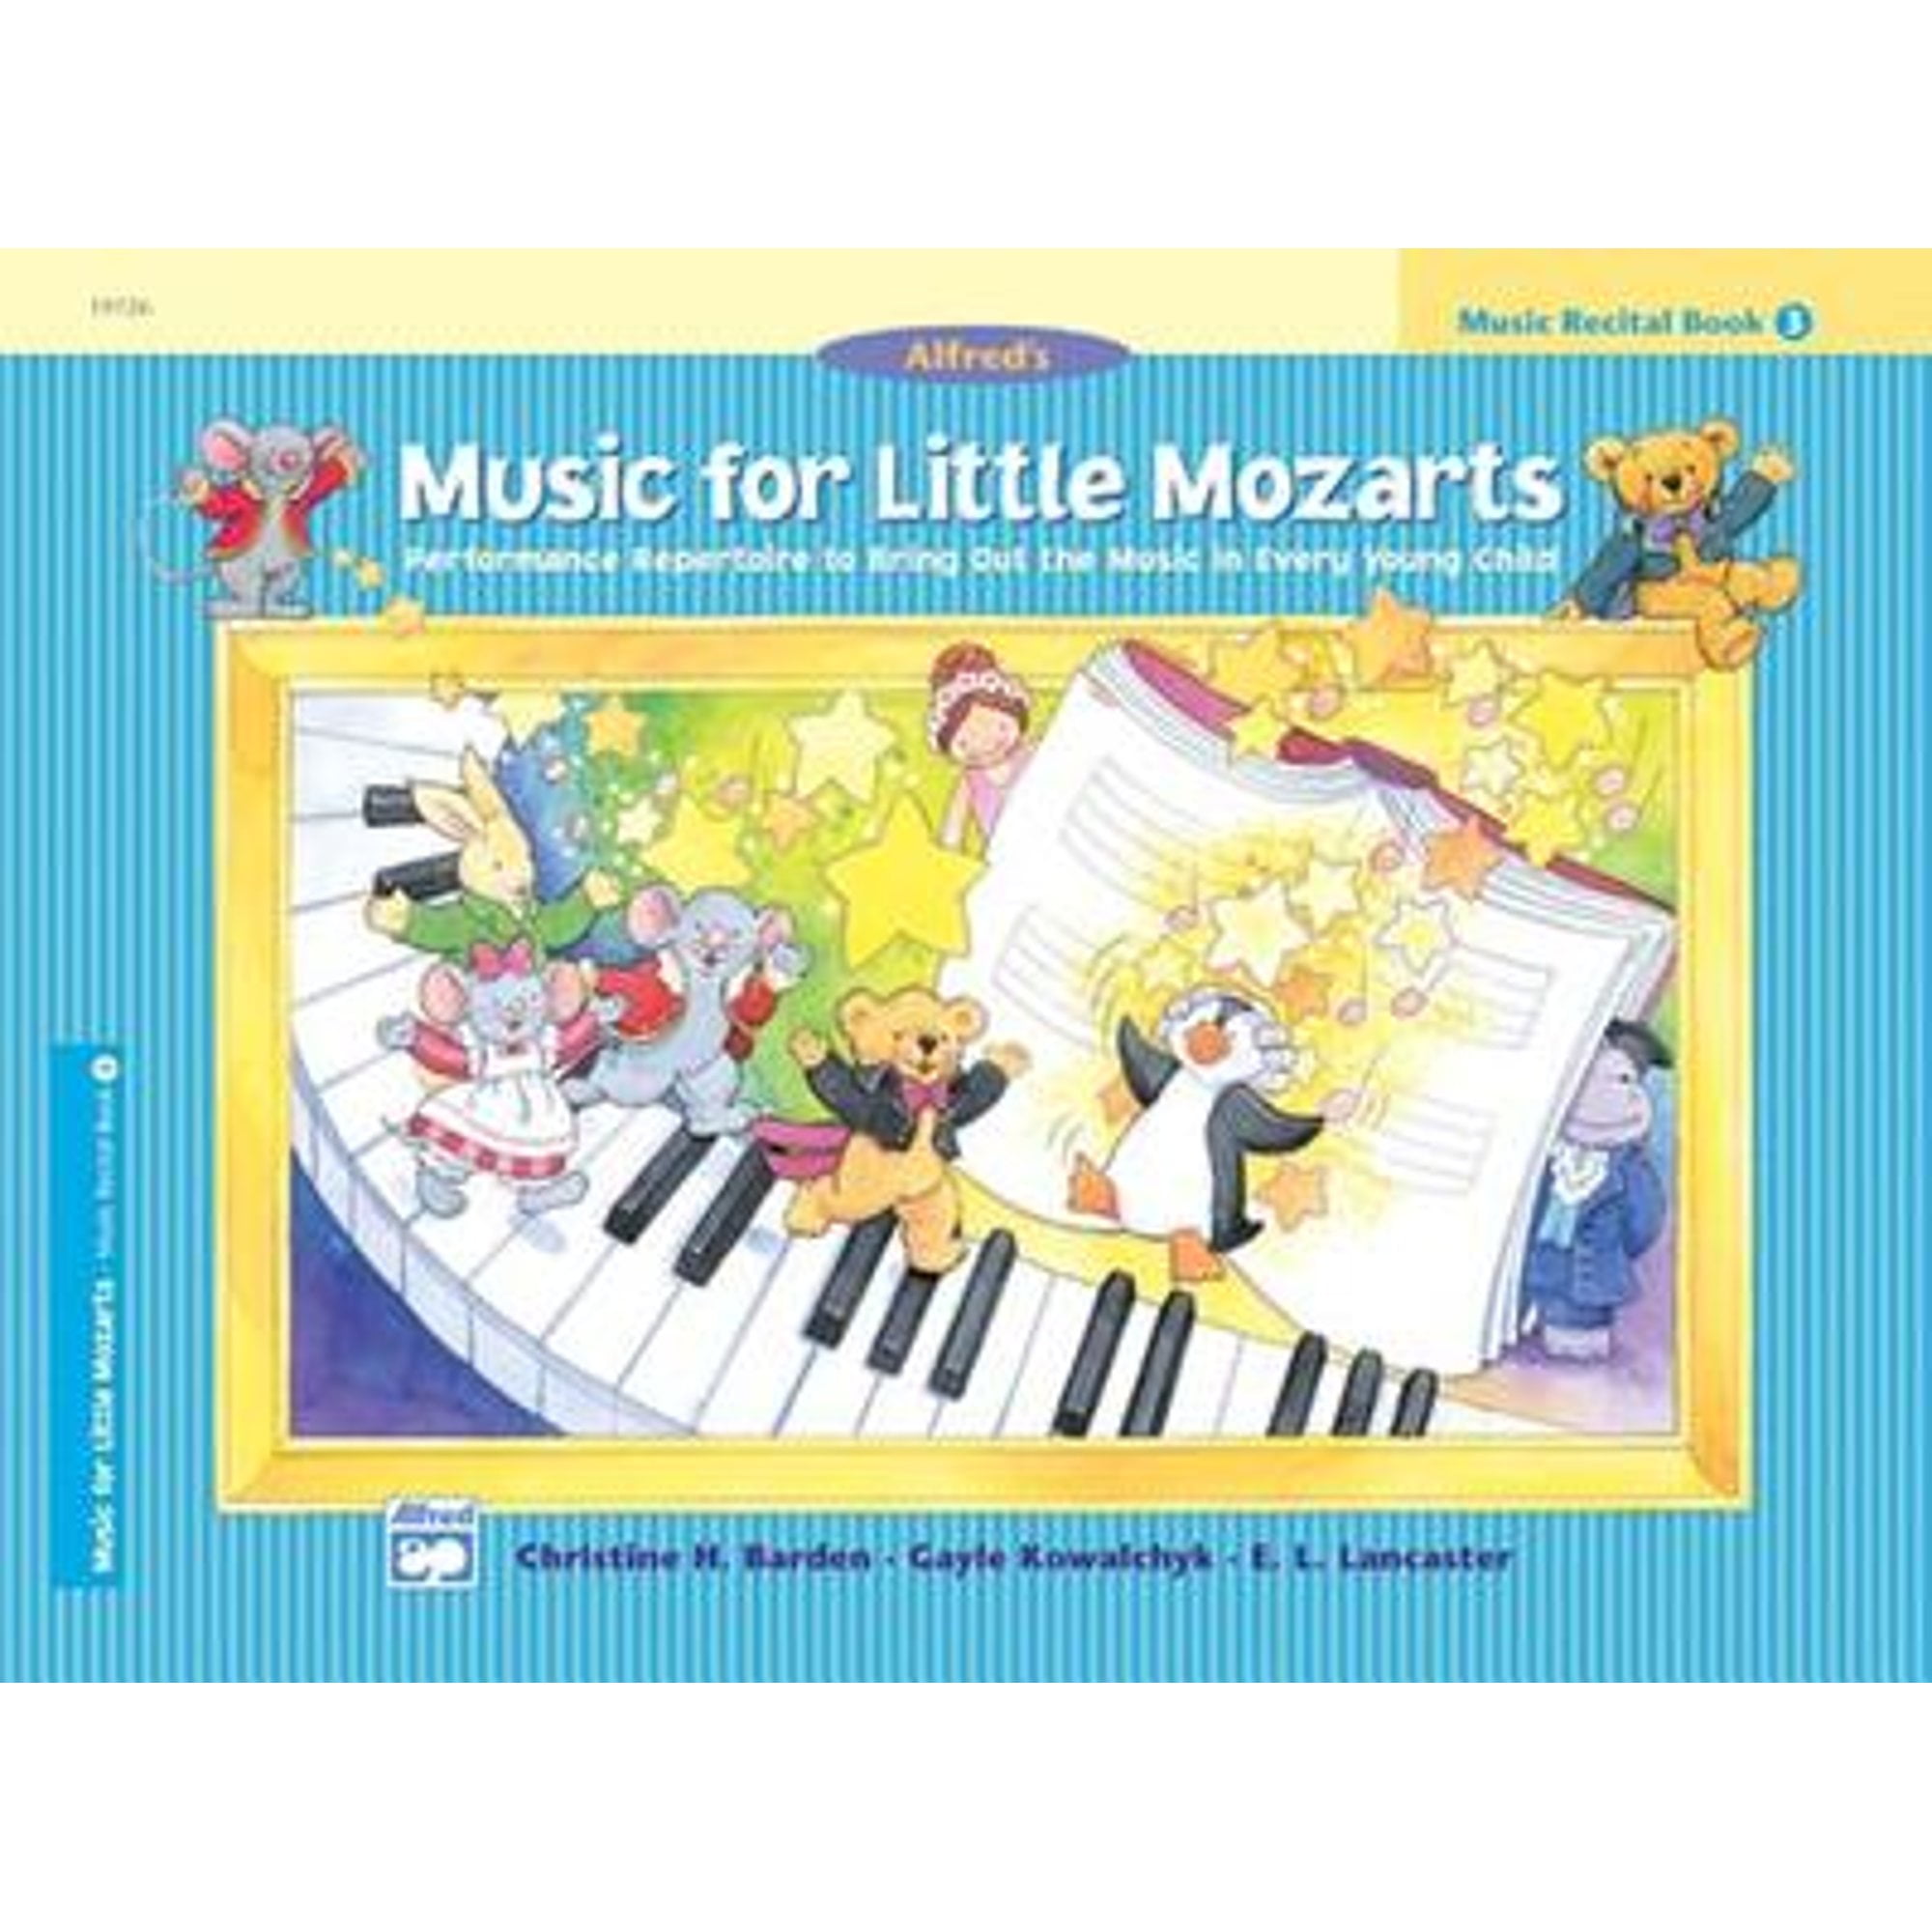 Pre-Owned Music for Little Mozarts Recital Book, Bk 3: Performance Repertoire to Bring Out the (Paperback 9780739012574) by Christine H Barden, Gayle Kowalchyk, E L Lancaster